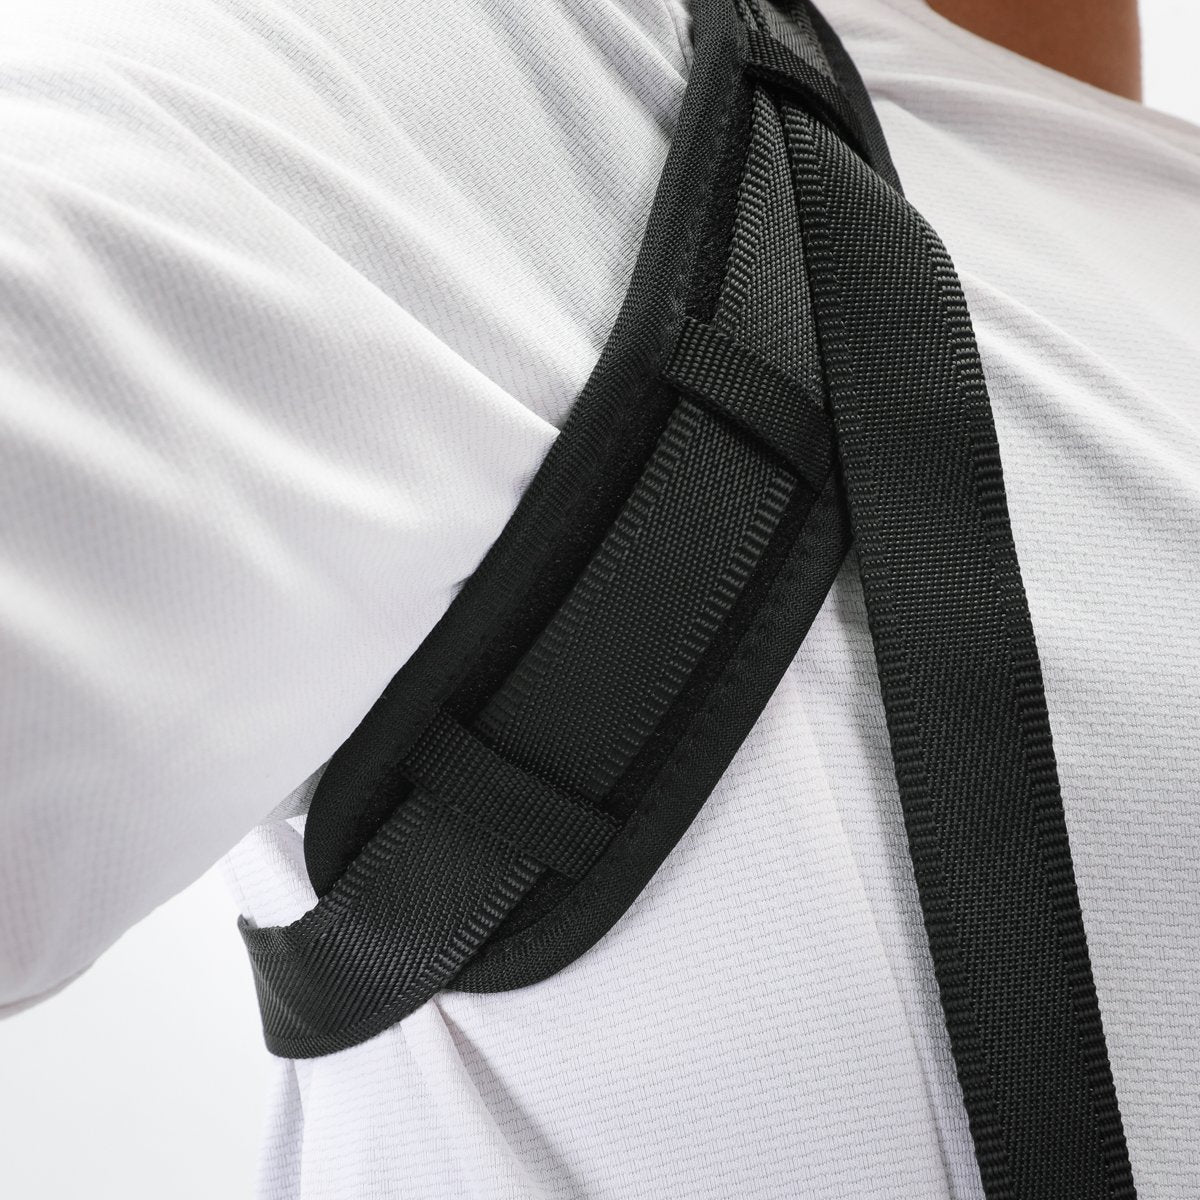 Back Support Breathable Posture Corrector Pain Relief